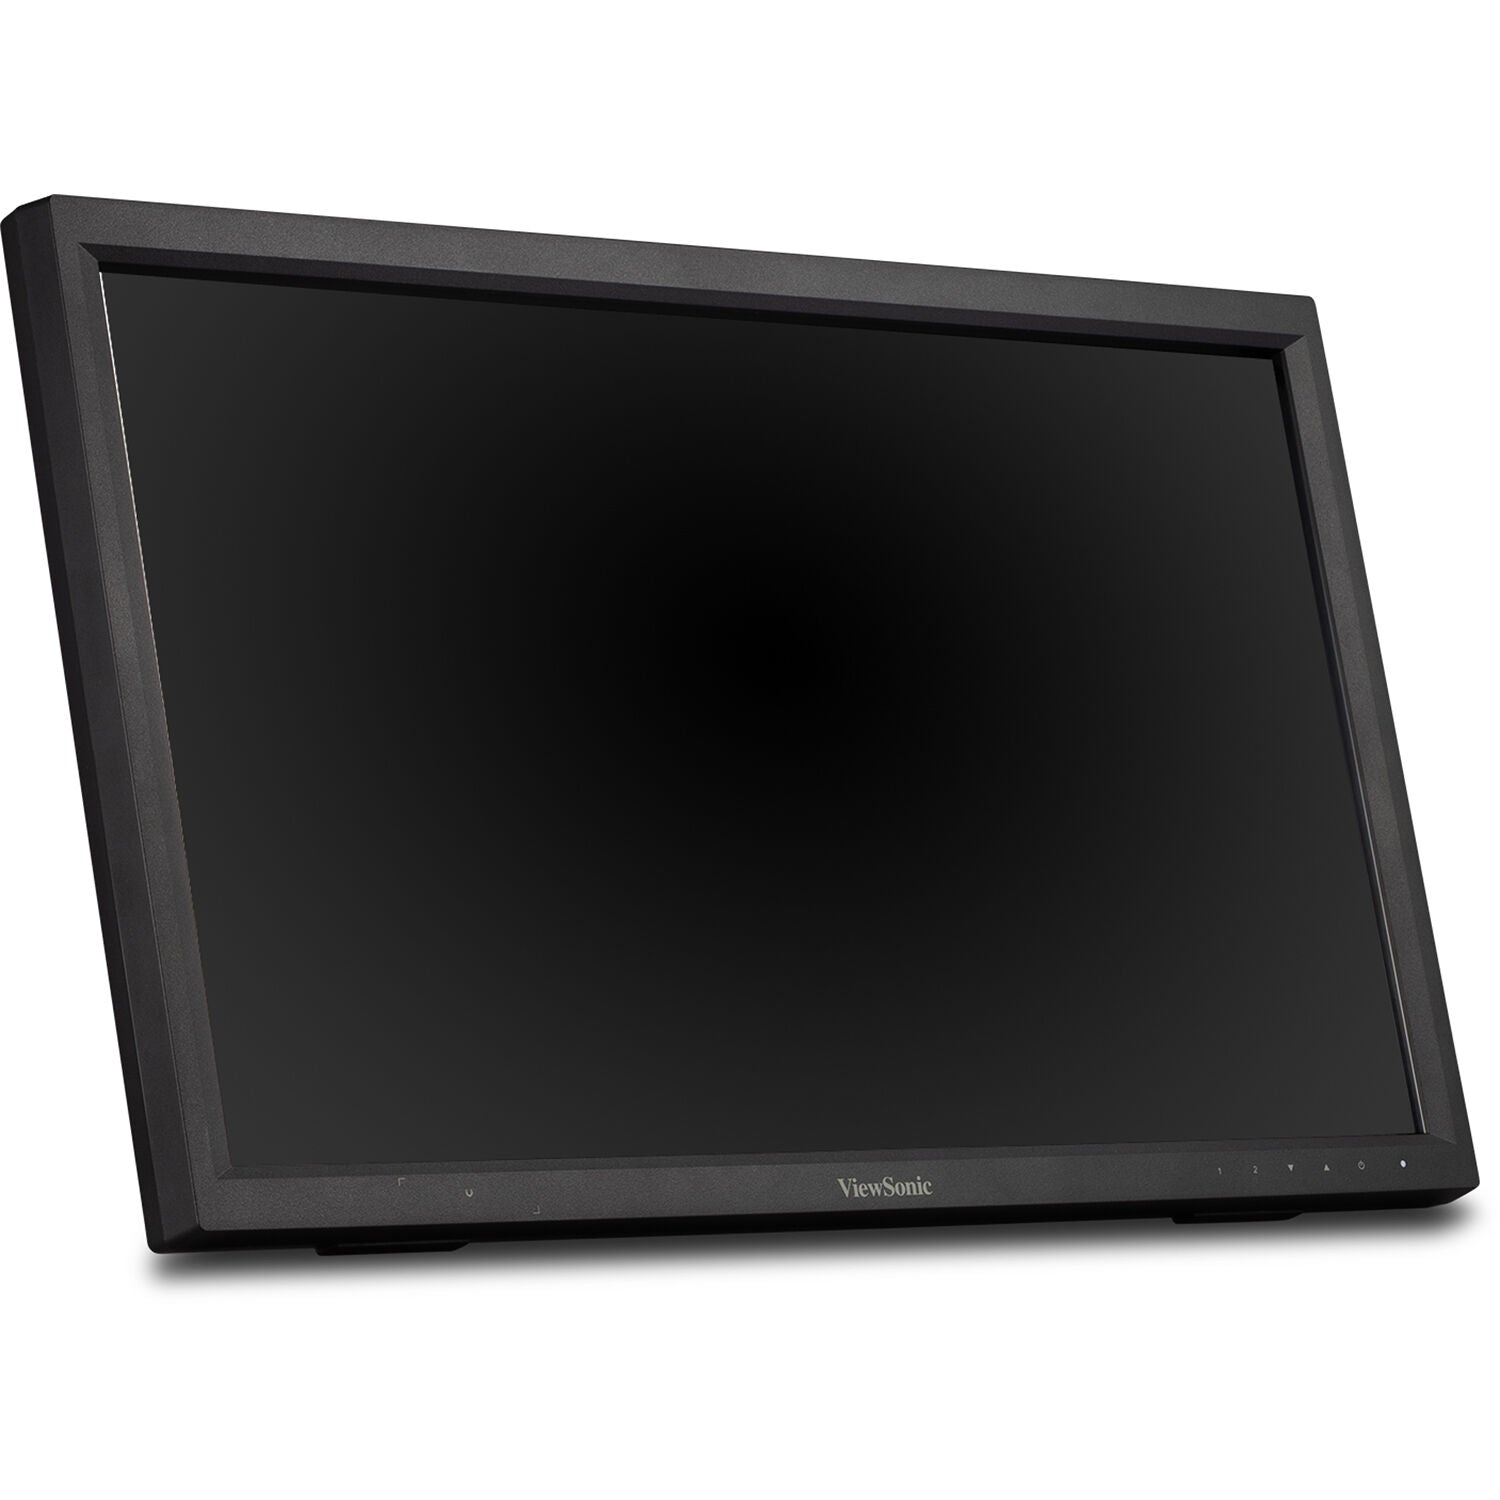 ViewSonic TD2223-S 22" 16:9 10-Point IR Multi-Touch TN Display - Certified Refurbished